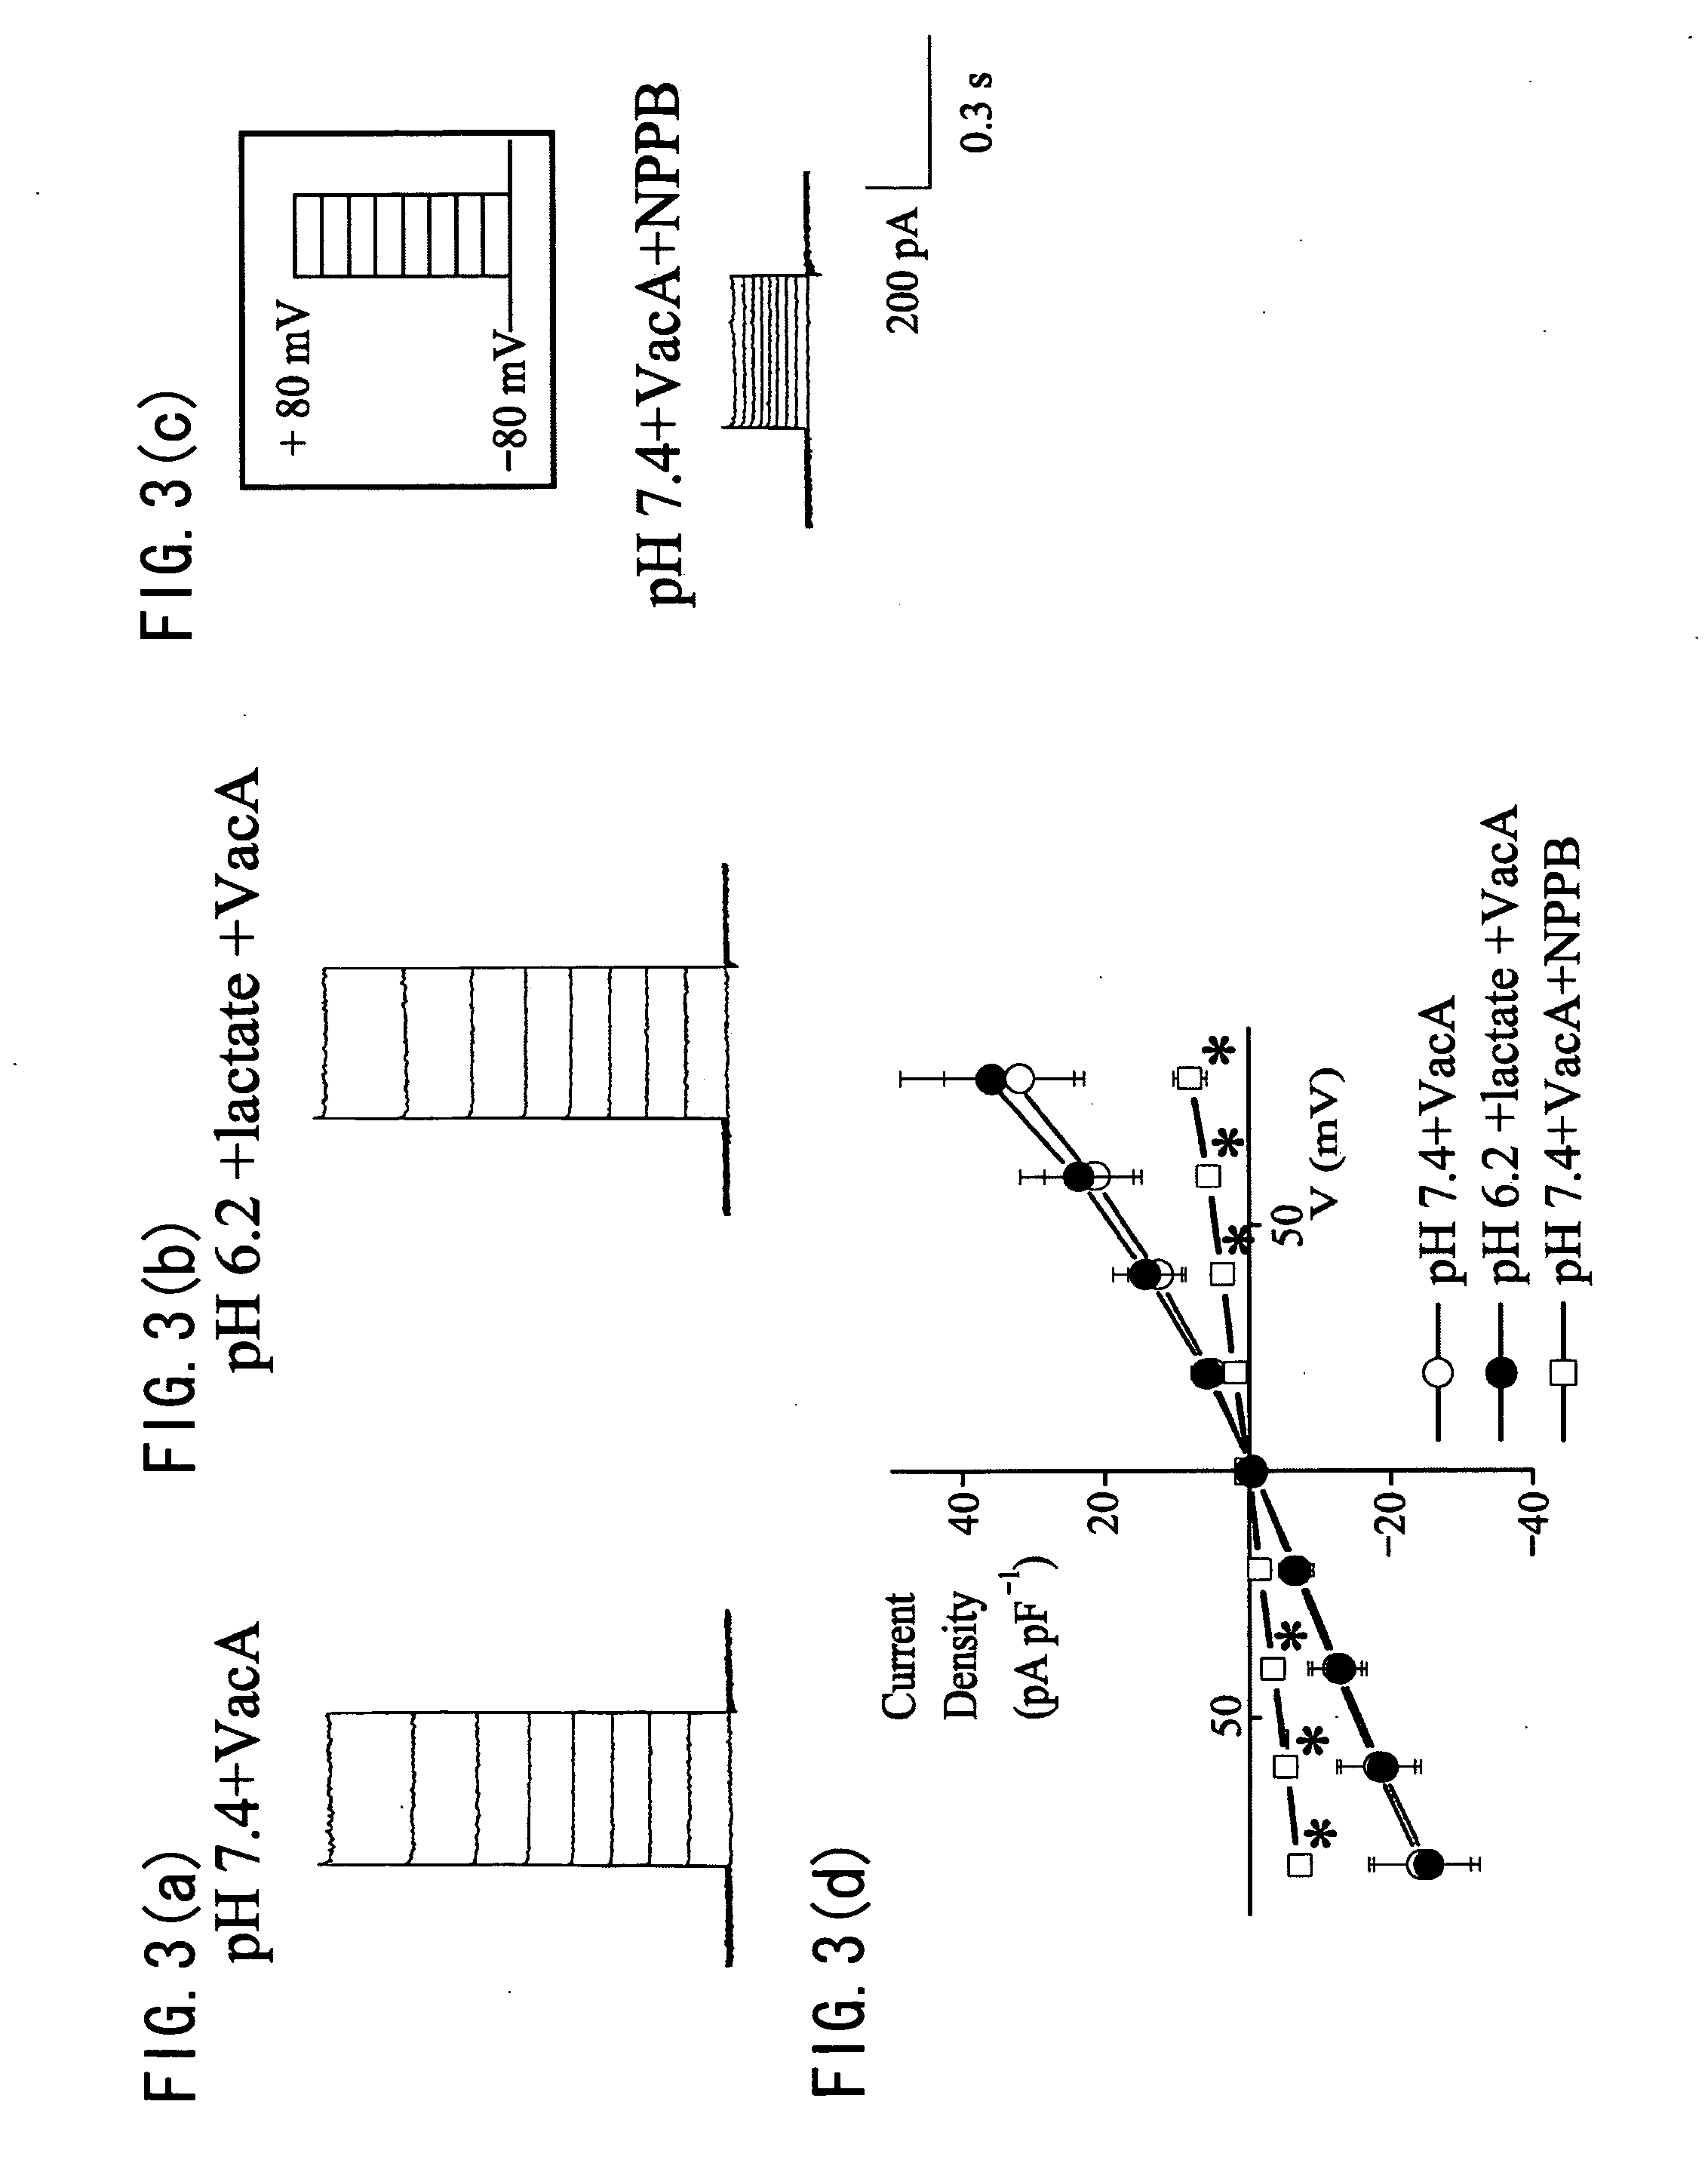 Method for inhibiting cell death, cell death inhibitor, and remedy for disease caused by cell death containing the cell death inhibitor